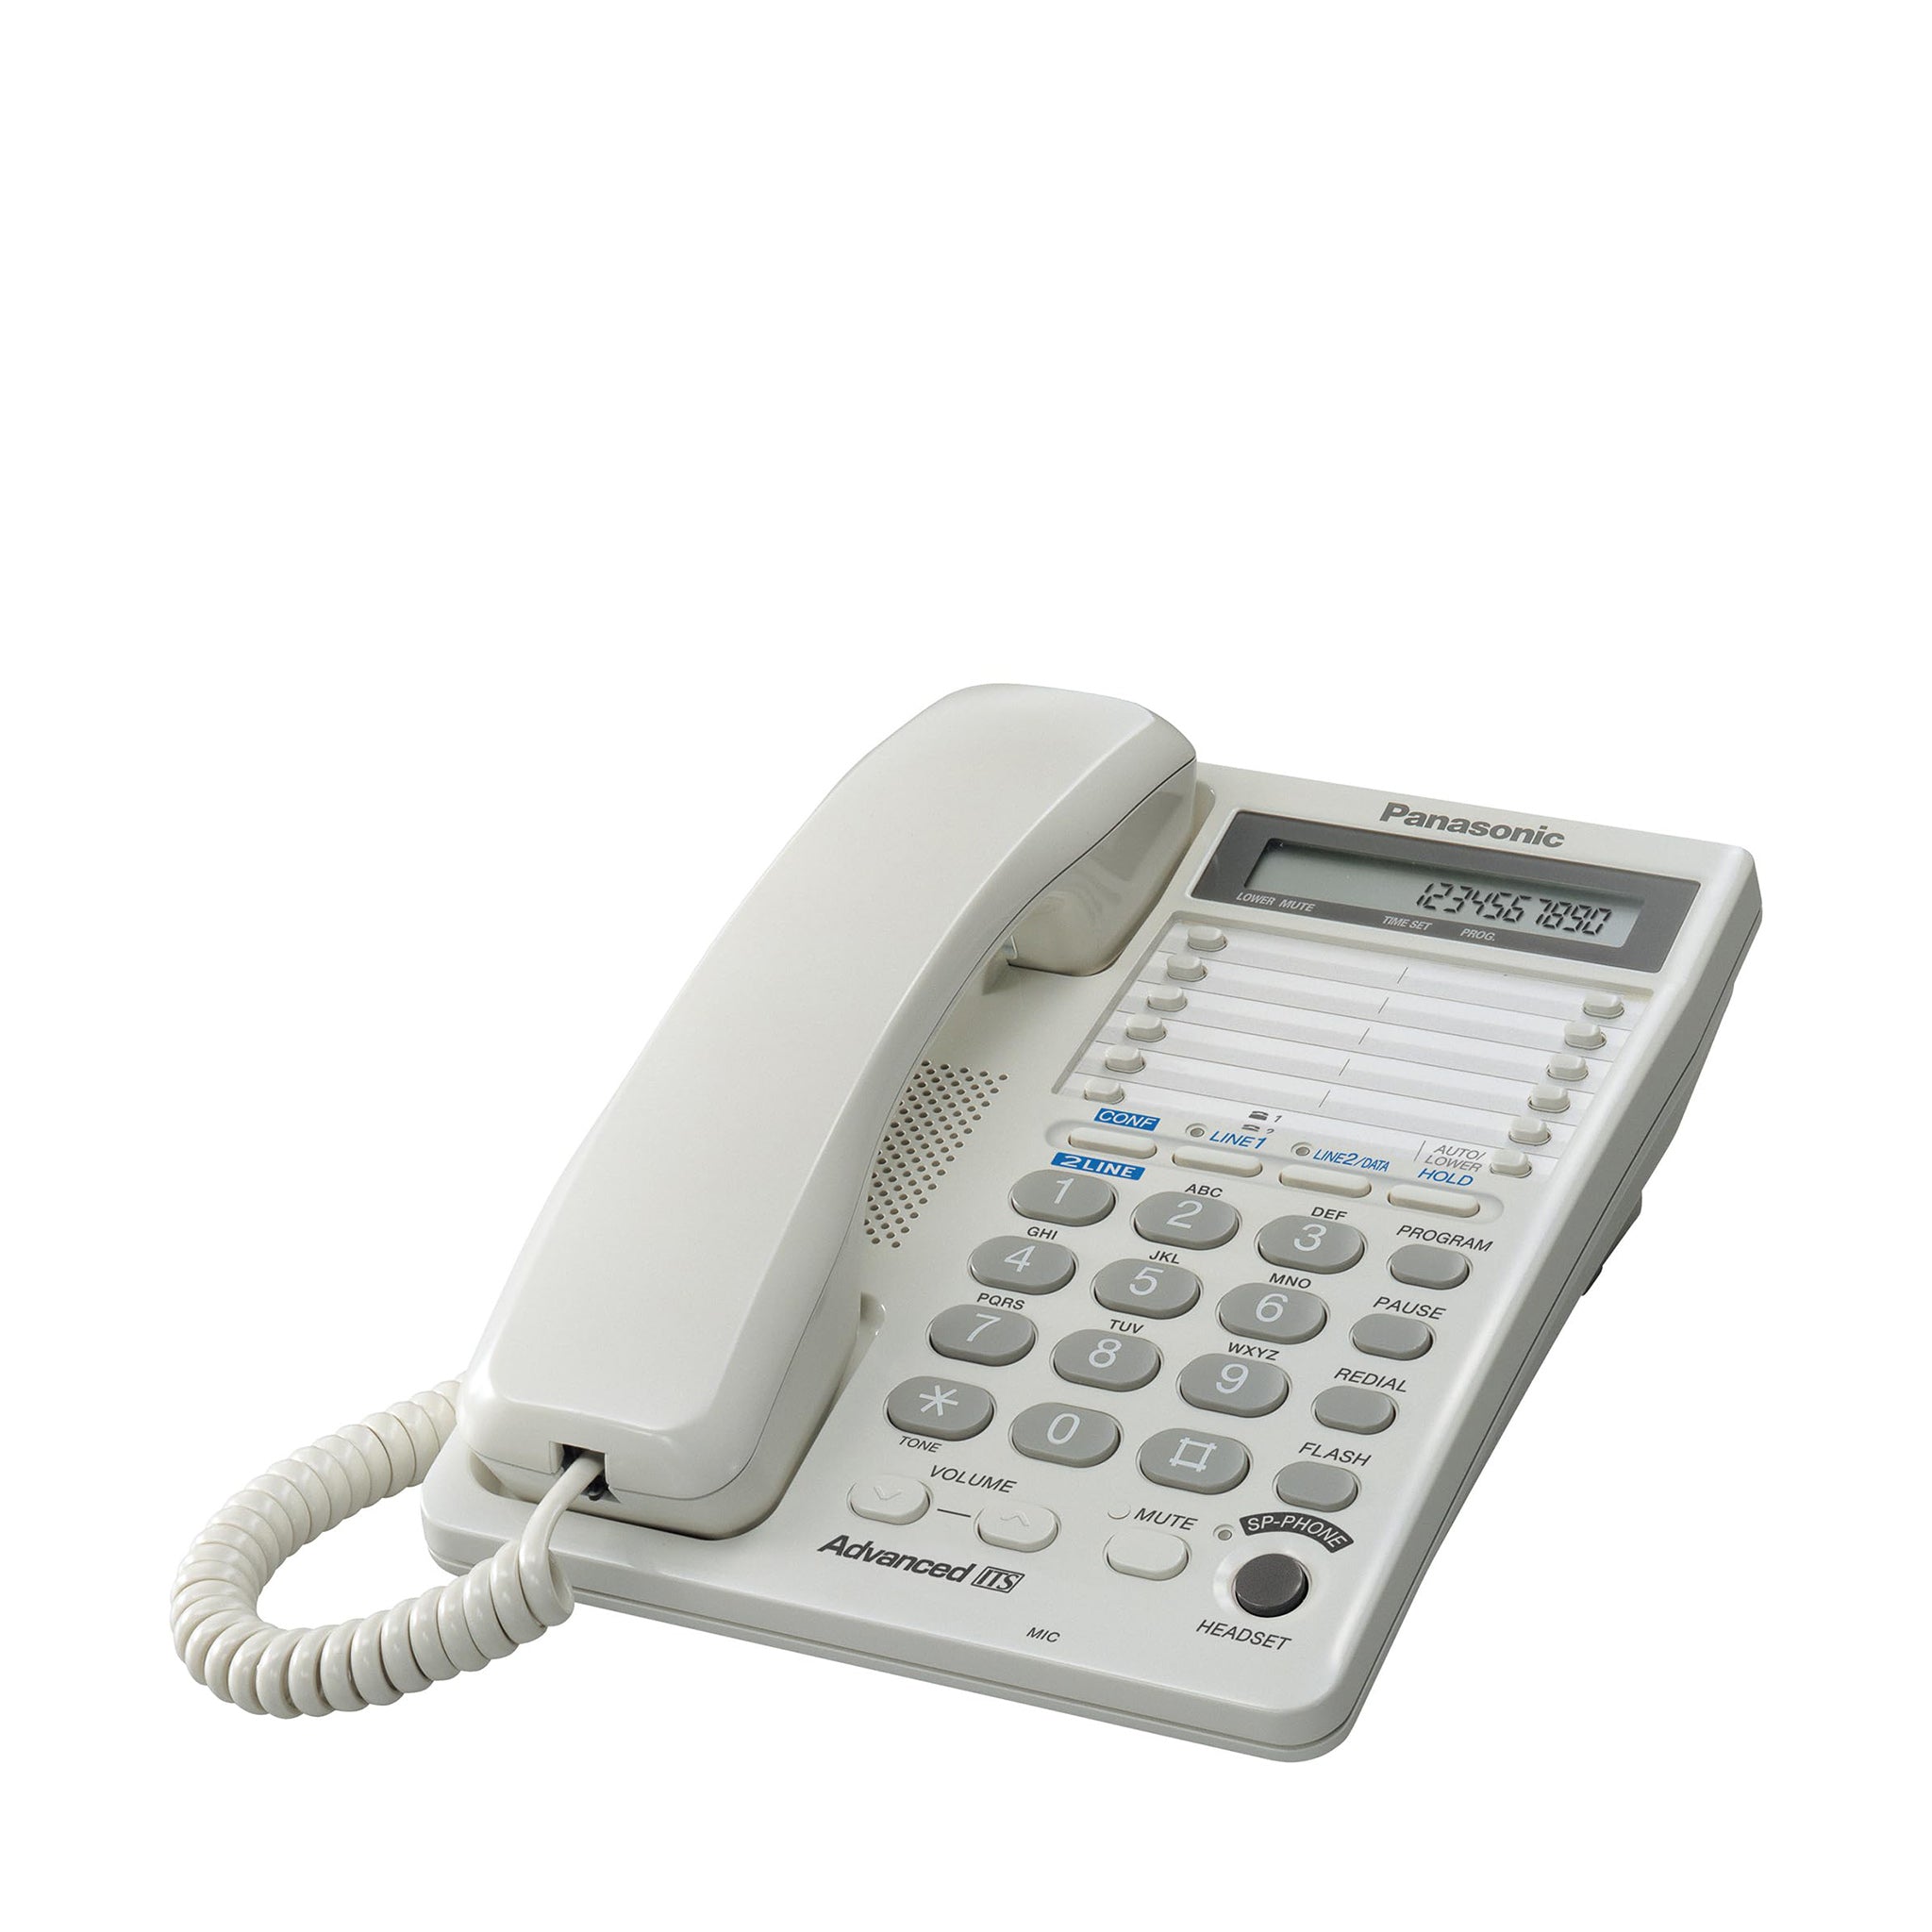 Panasonic Link2Cell Corded Phone System with 2 Corded Handsets, Digital  Answering Machine - KX-TGF382M